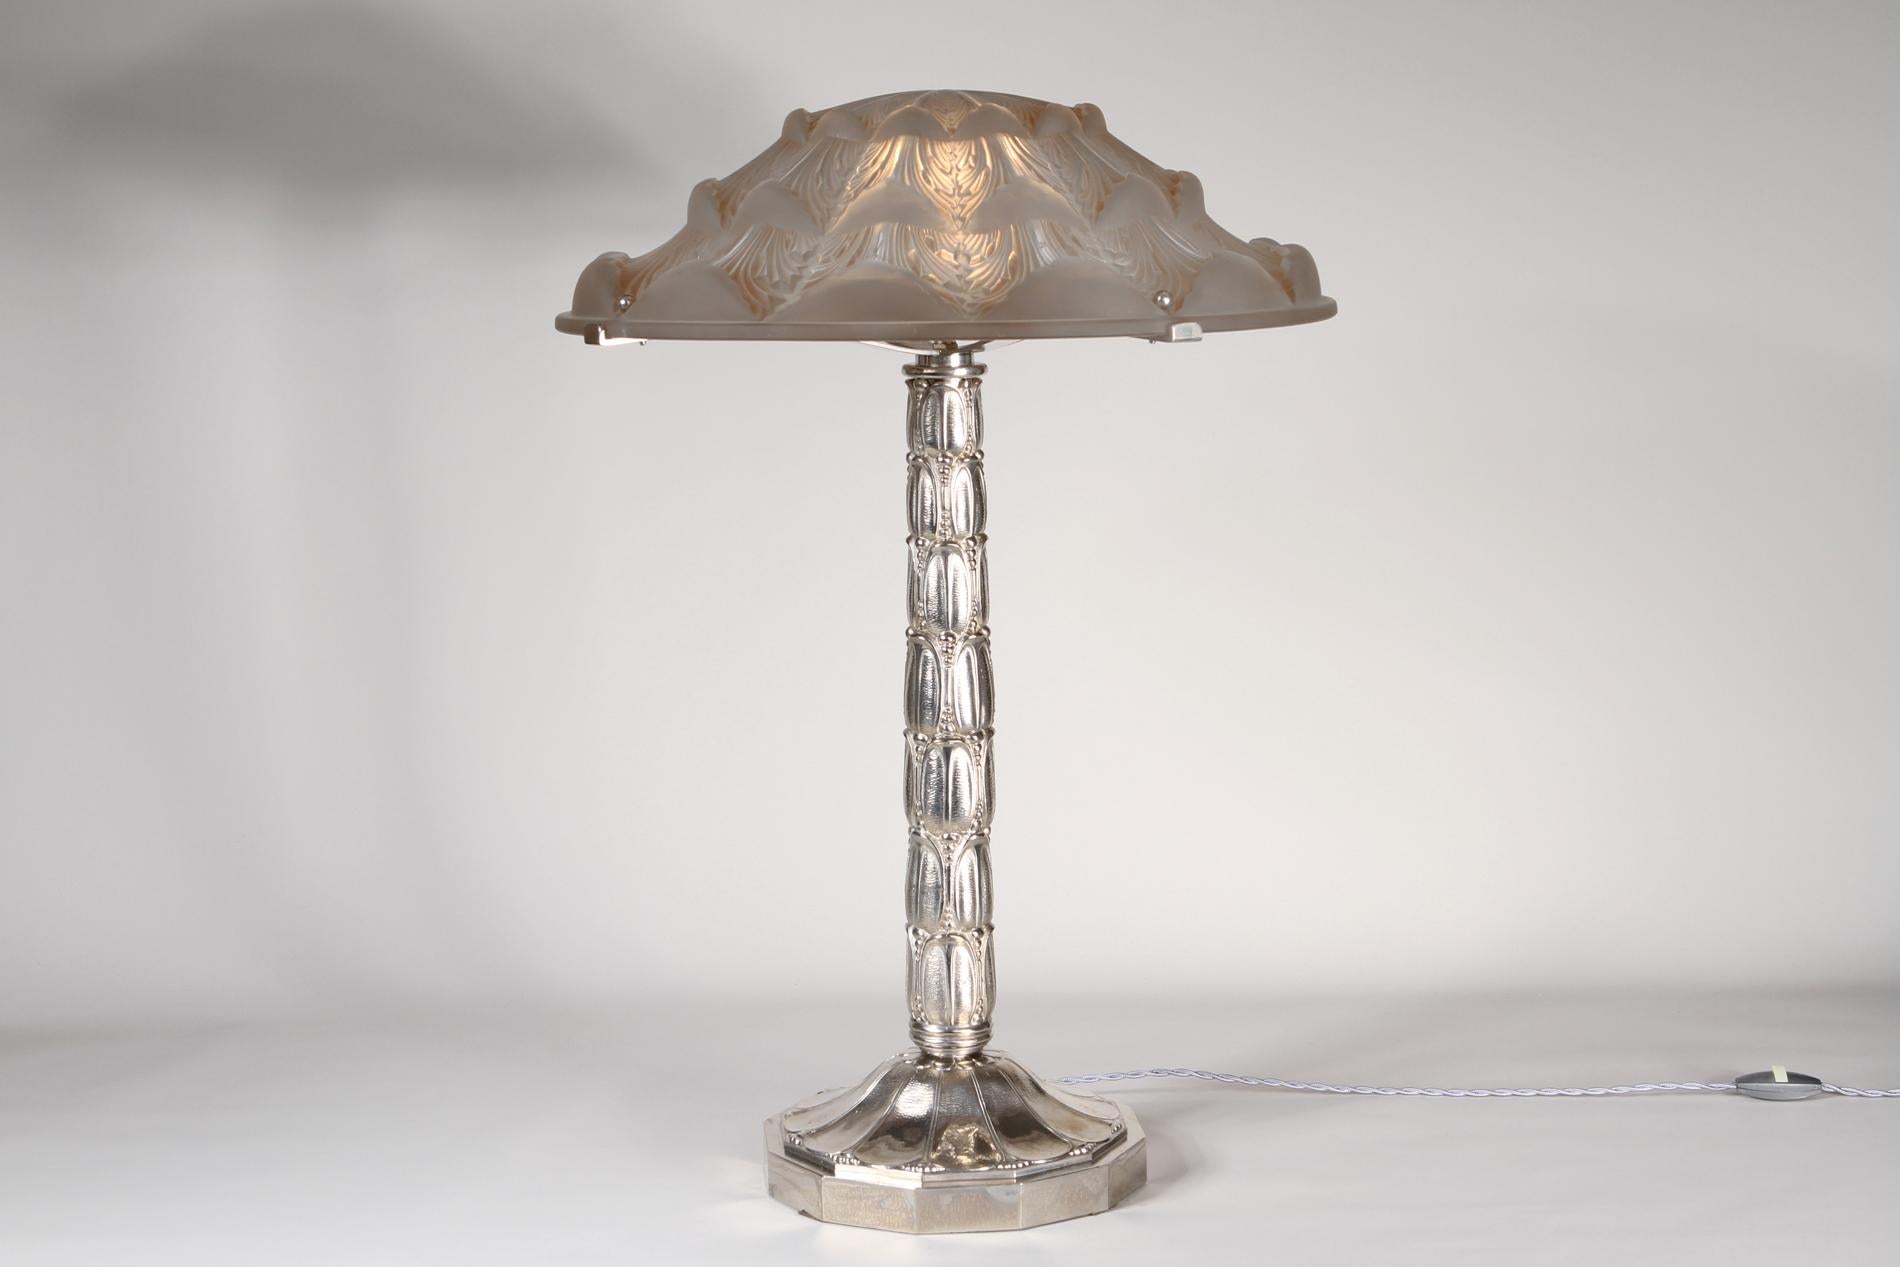 French Art Deco table lamp with lampshade by Lalique, Gaillon model sepia patina basin, model created in 1927, not reproduced after 1947. The base is in nickel-plated bronze. The size is really important and rare for this model. 

Documented in the